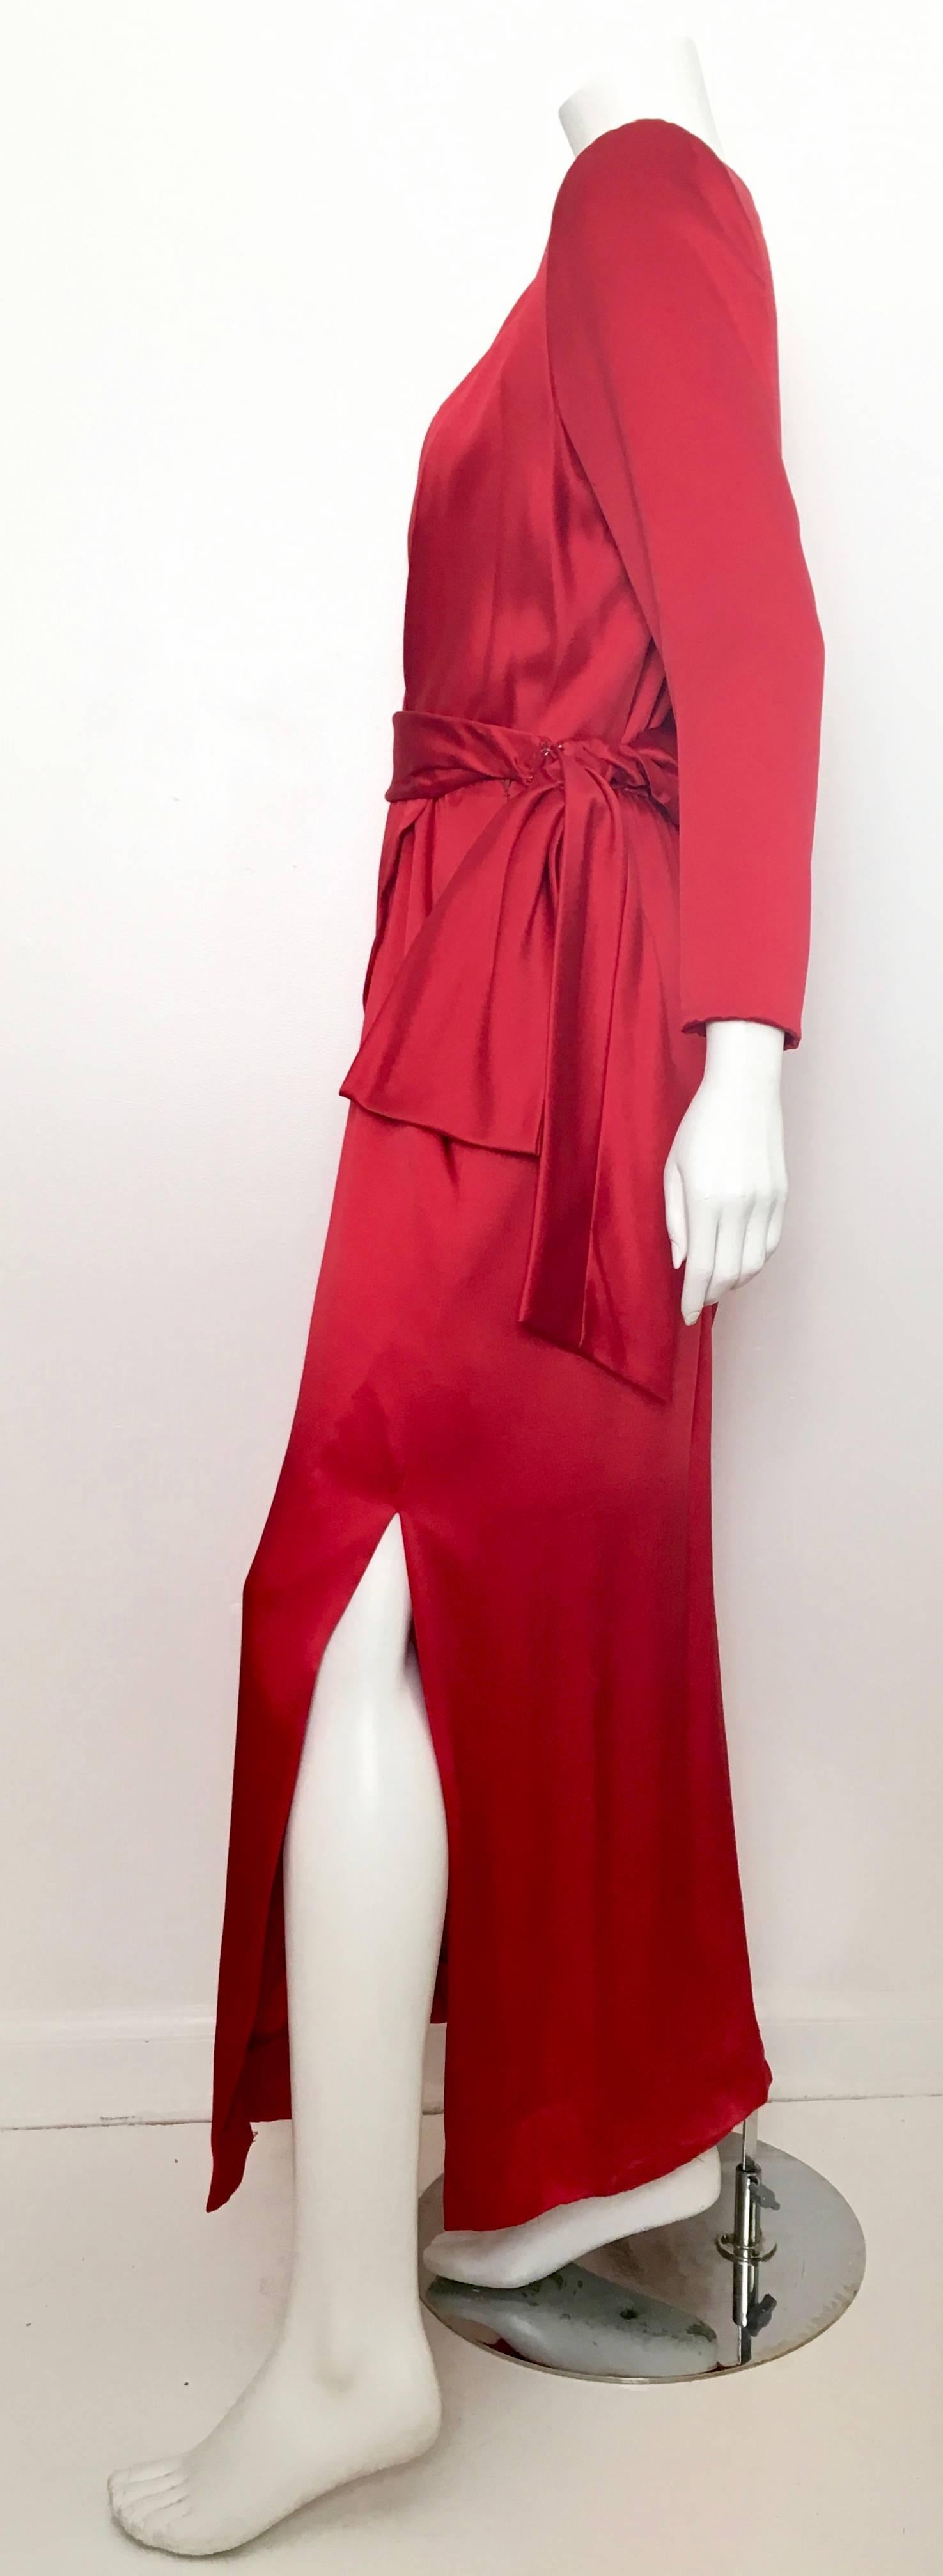 Givenchy Couture 1996 Red Silk Gown Size 10 / 42. 3